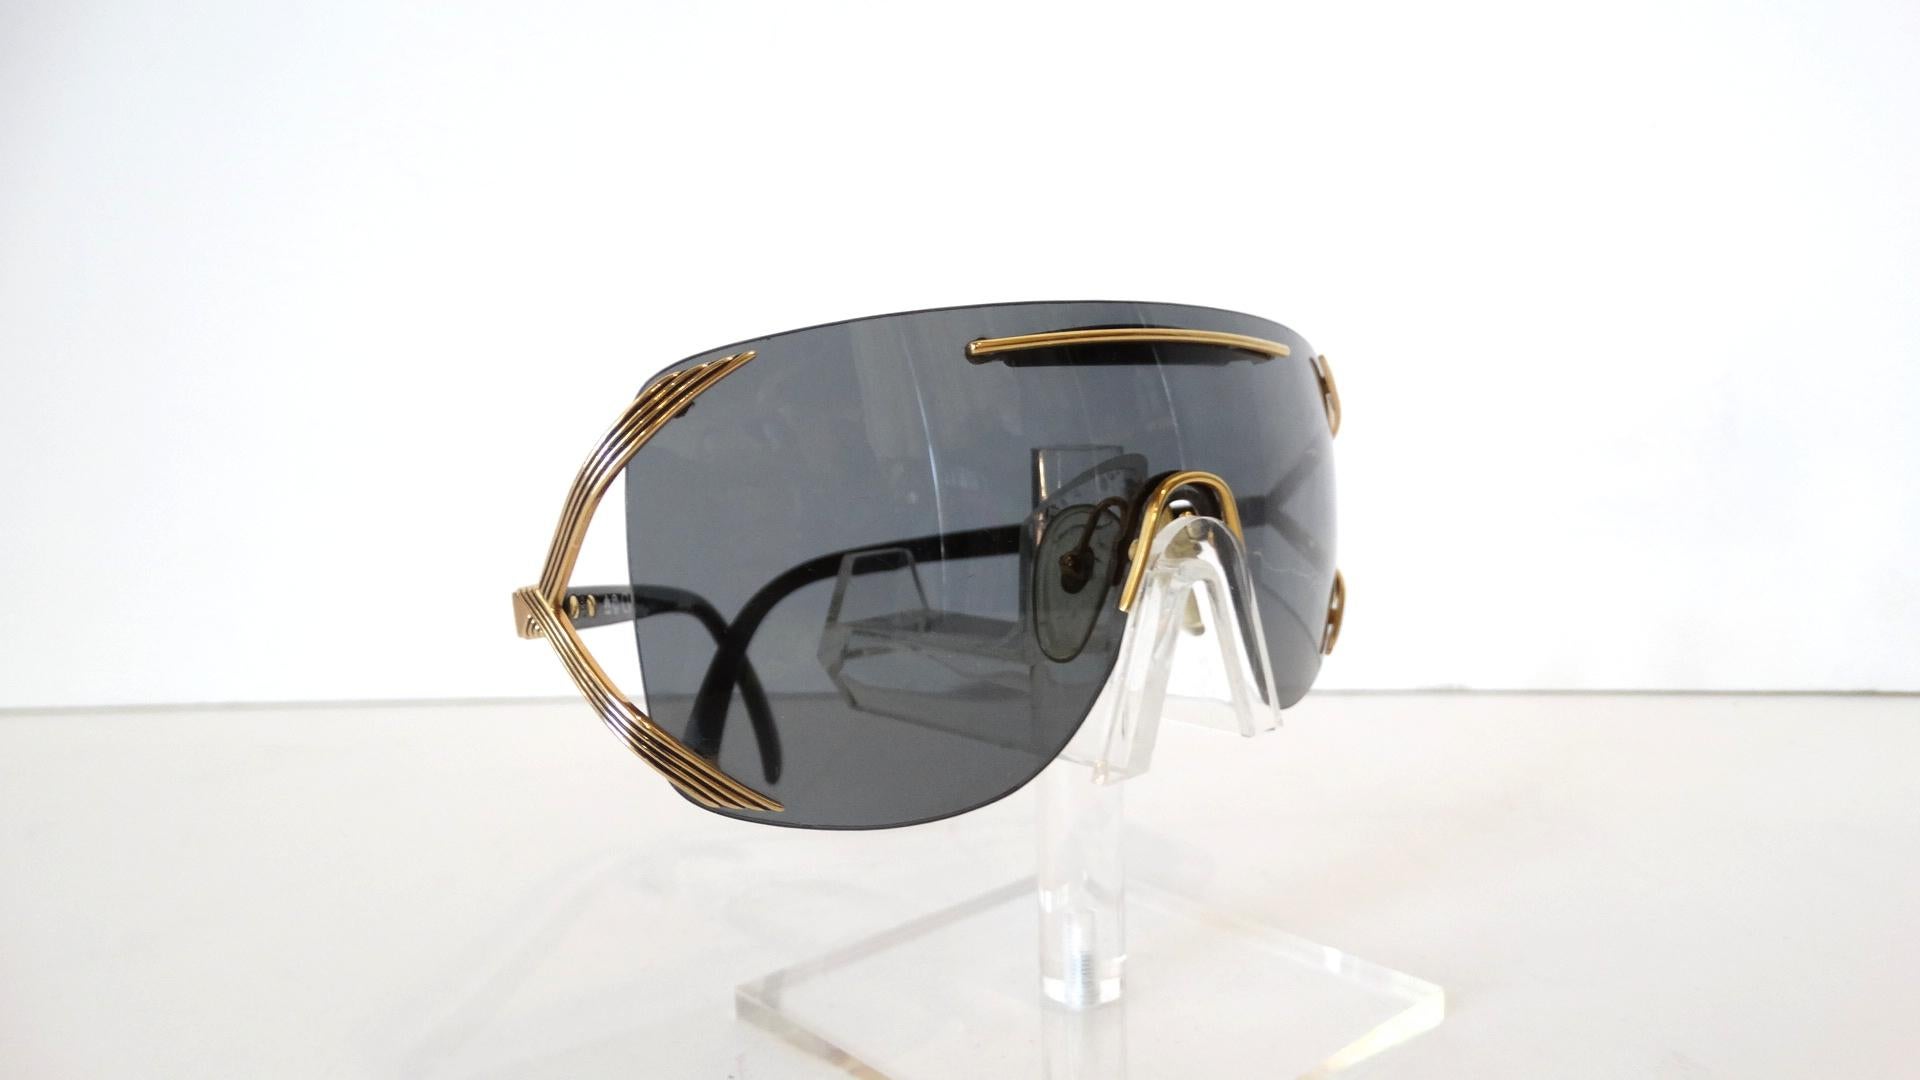 A pair of 1980s vintage Christian Dior 2434 shield style sunglasses with gold tone metal accents, smoky tinted lenses, a black plastic brow bar, clear nose pads, “CD” branding at the temples and black plastic stems. They are marked to the interior